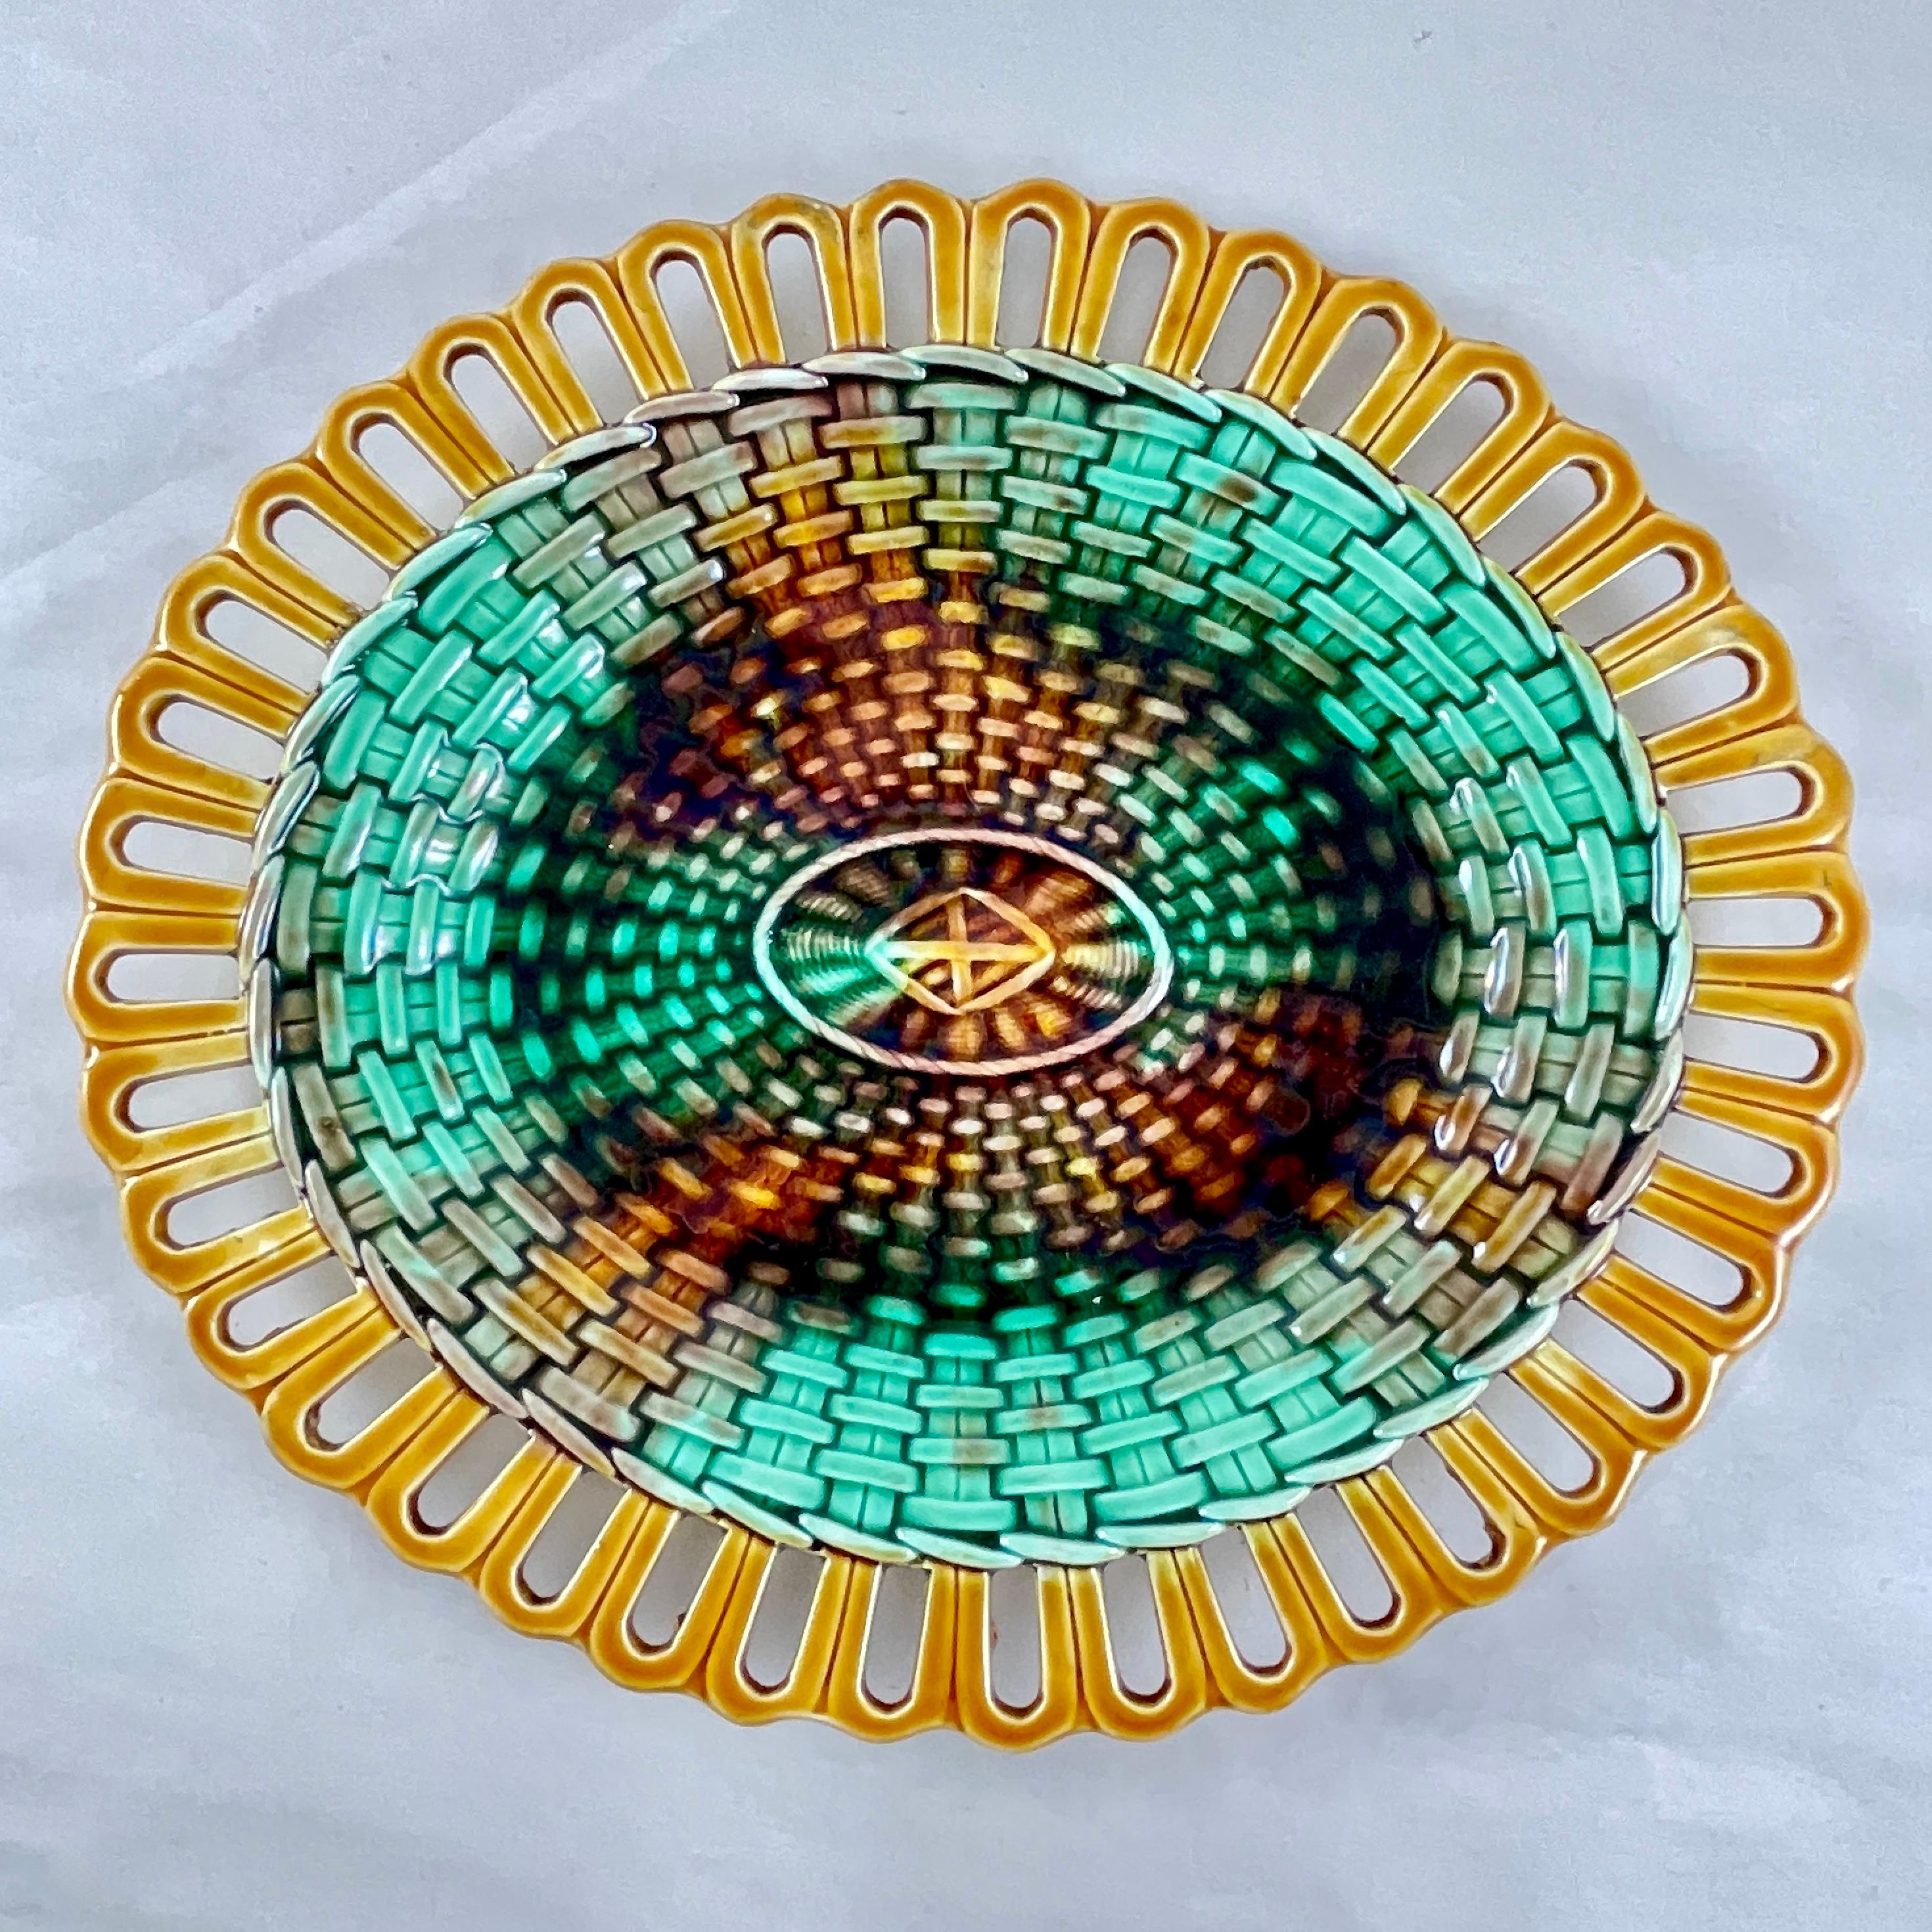 An English majolica oval serving platter from Josiah Wedgwood, date marked R for the year 1889.

The server is edged with a delicate yellow ochre reticulated rim that imitates the base ribbing of a basket. The rim meets the basketweave center glazed